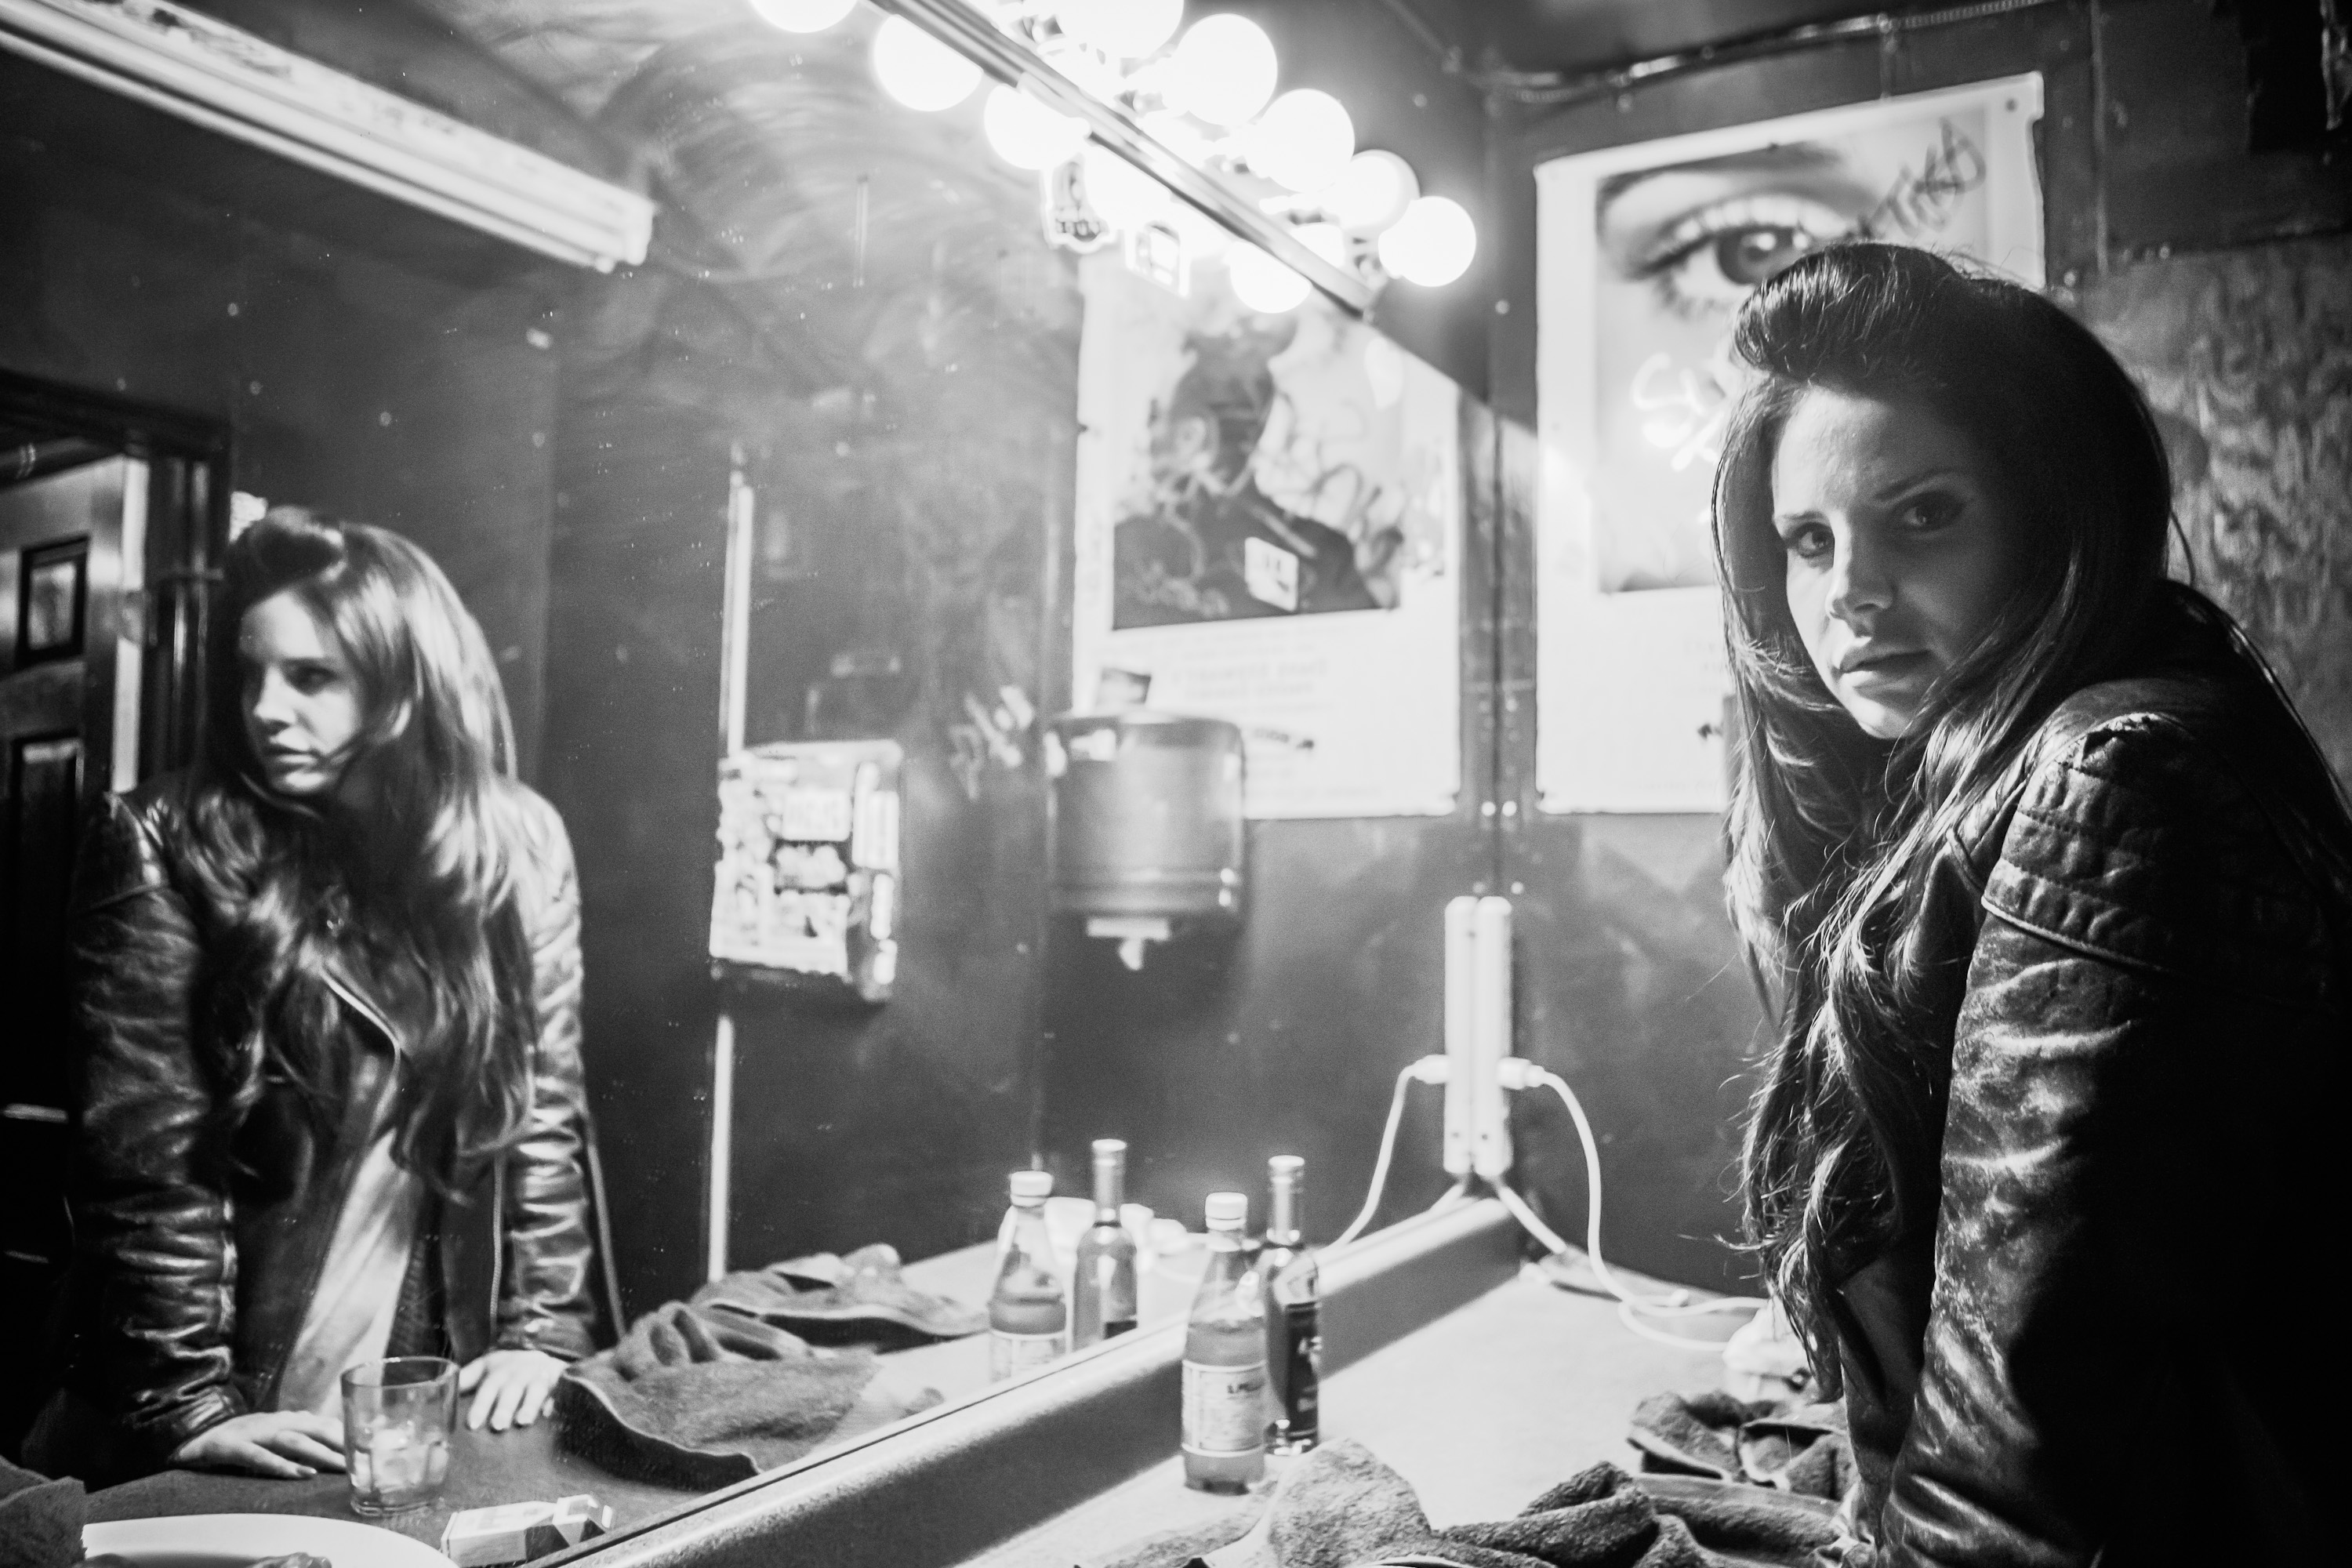 Lana Del Rey wearing a jacket and standing in front of a mirror